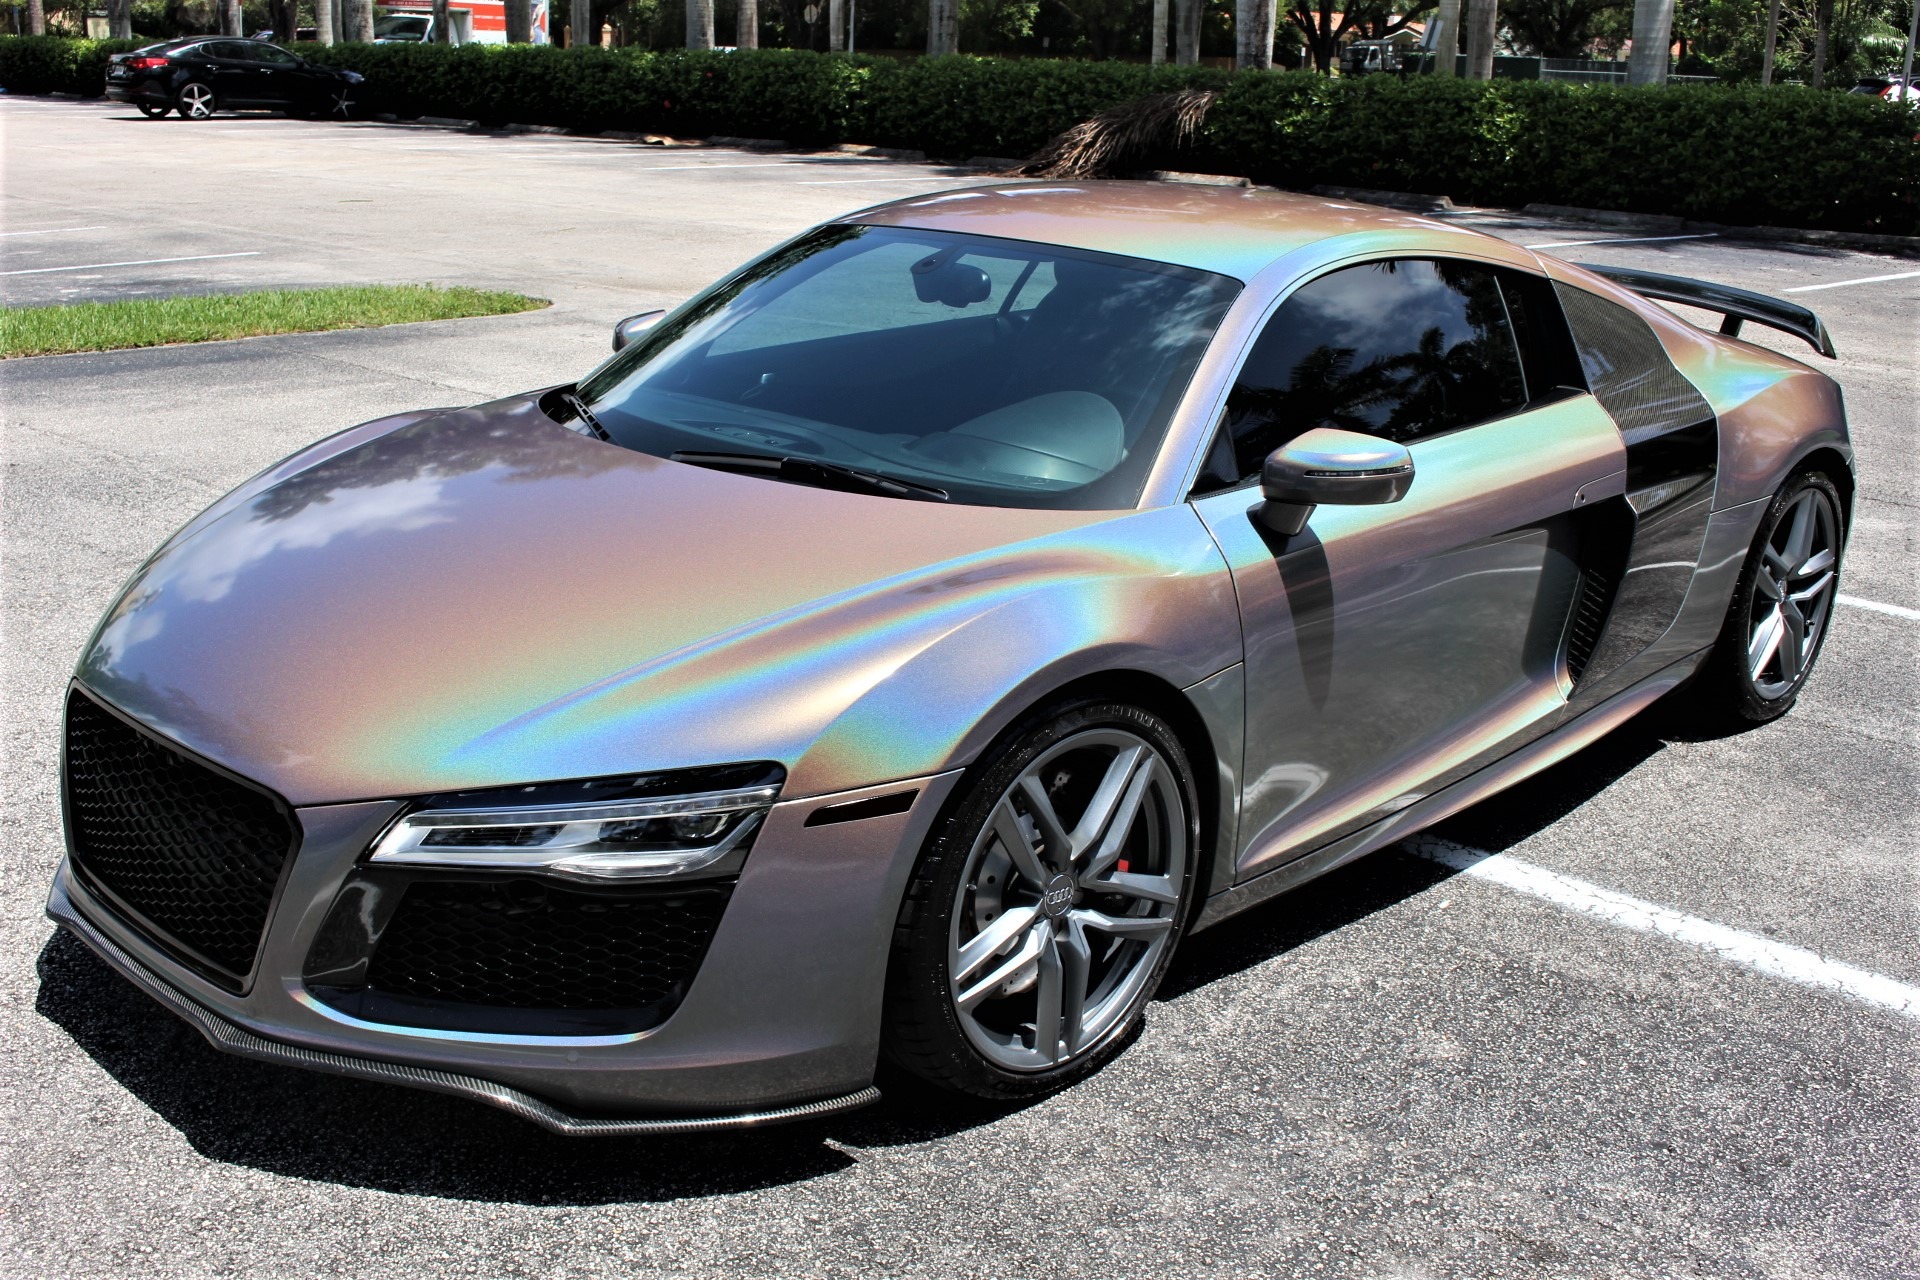 Used 2014 Audi R8 5.2 quattro For Sale ($89,850) | The Gables Sports Cars  Stock #001065